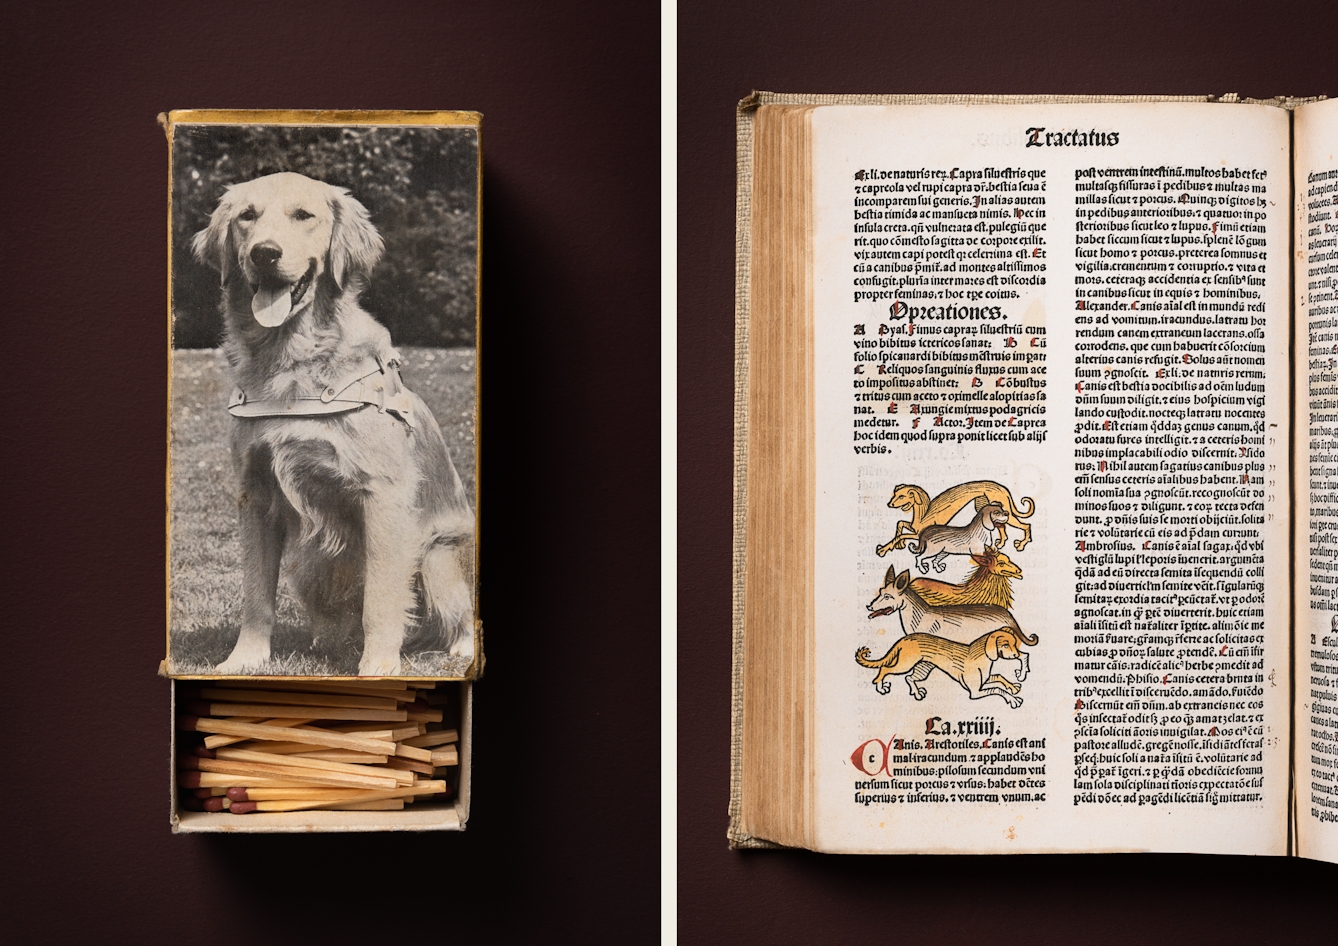 A photographic diptych. The image on the left shows an open matchbox complete with matches on the front of which is a black and white photo of golden retriever sitting, wearing a harness. The image on the right shows the left page of a medieval book featuring Latin text and an illustration of five dogs one behind the other in different tones of yellow.  The items appear on a plain brown background.